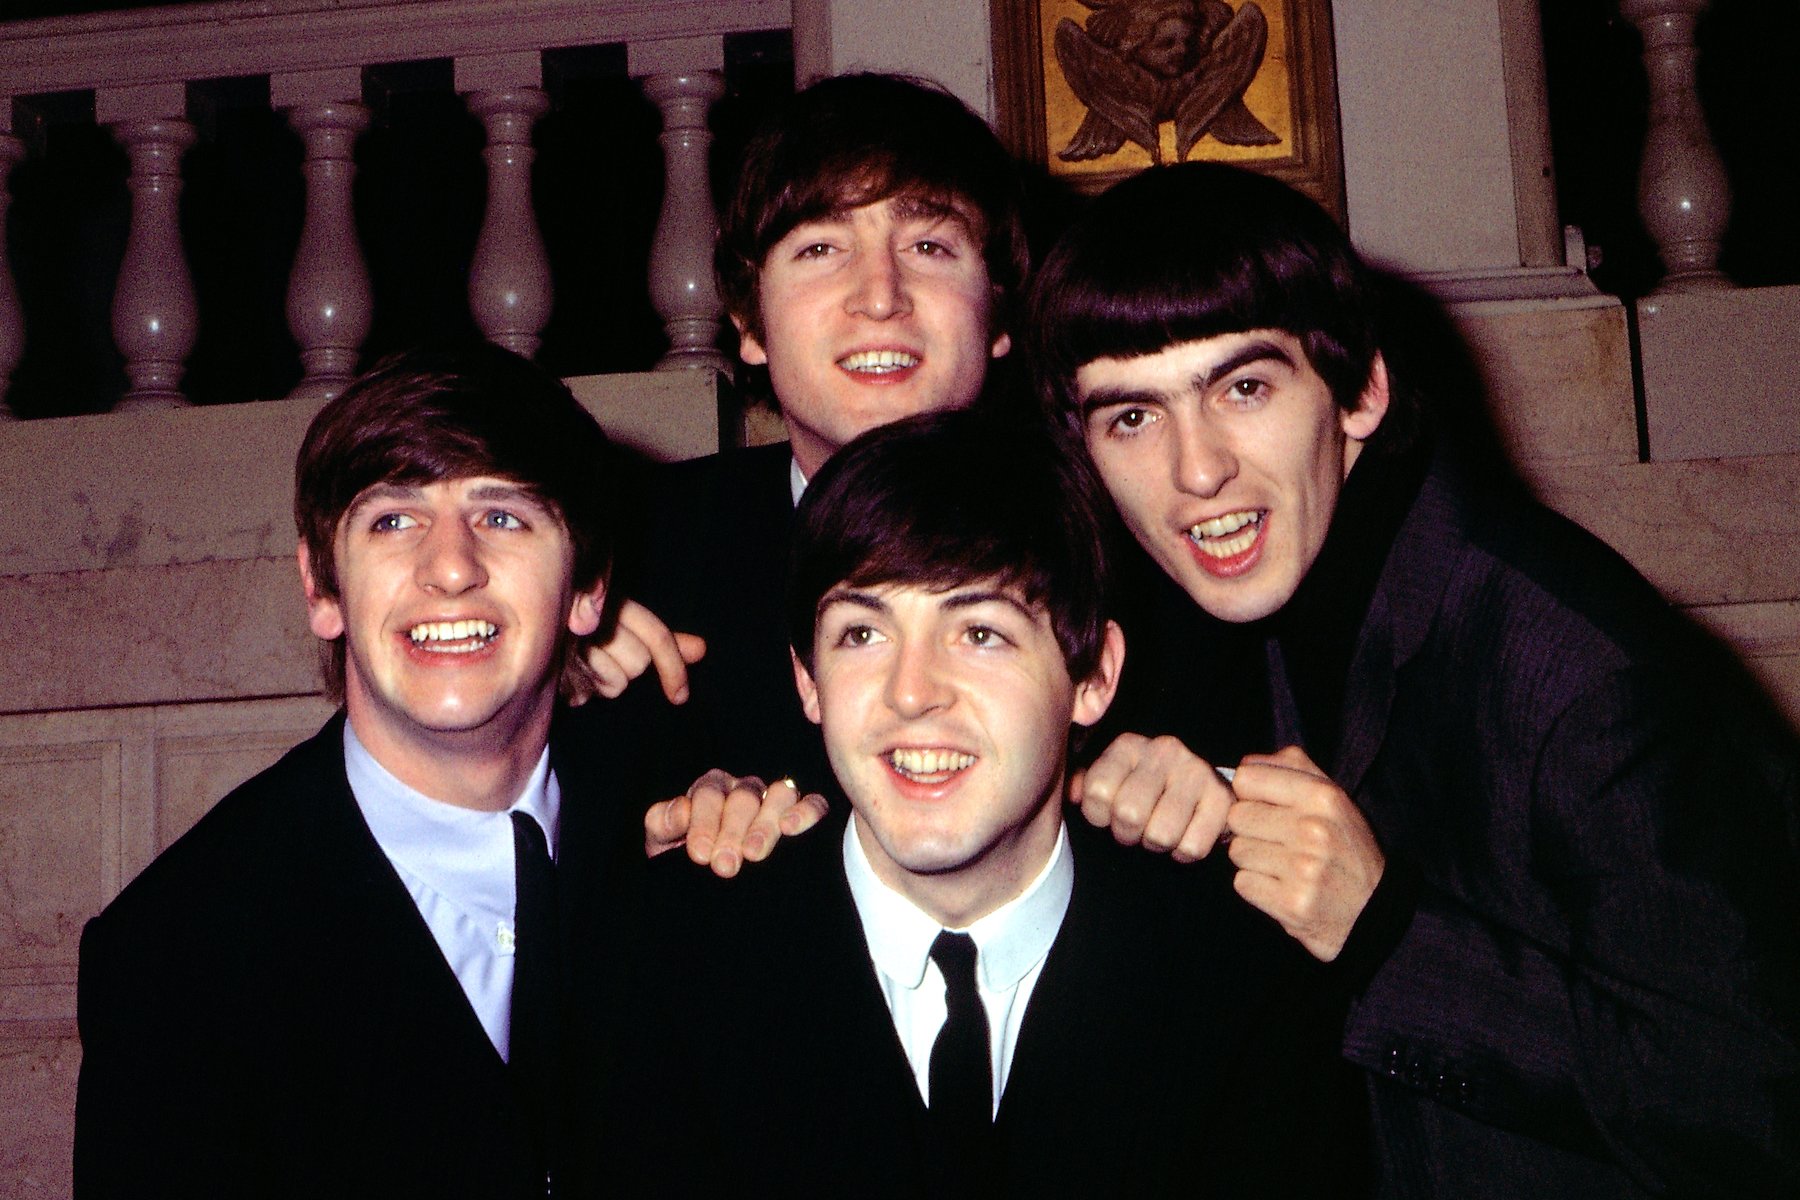 The Beatles (Ringo Starr, John Lennon, Paul McCartney, George Harrison) pose for a portrait wearing suits in circa 1964